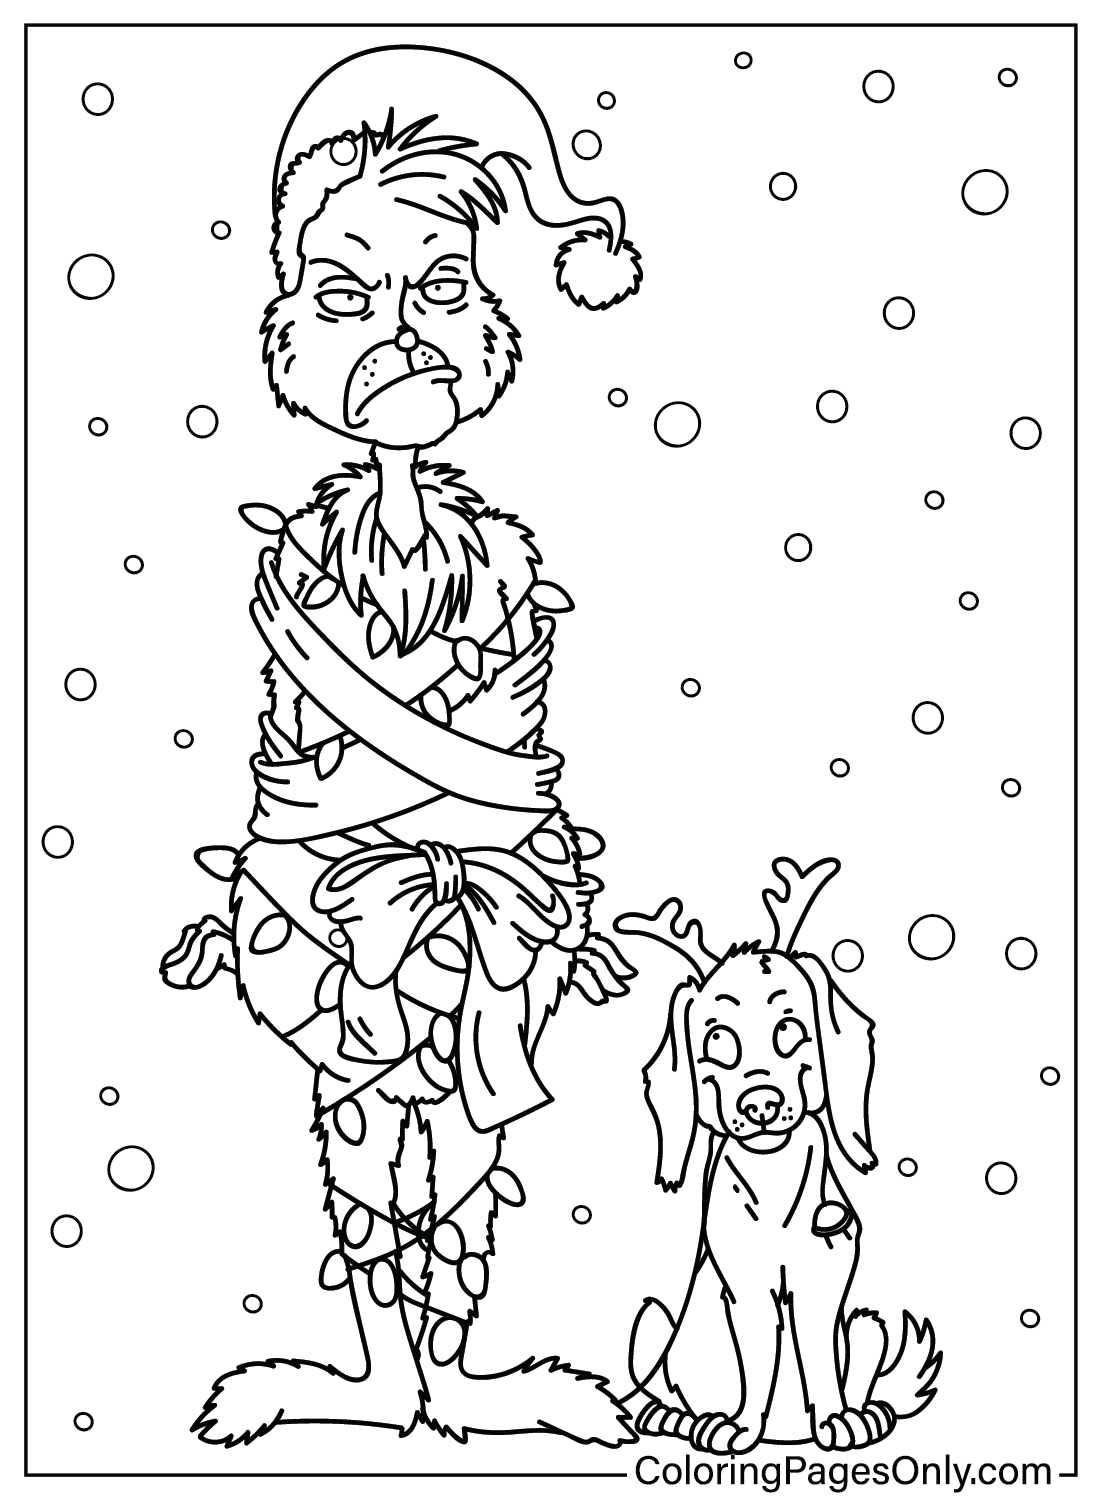 Printable Grinch Coloring Page from Grinch